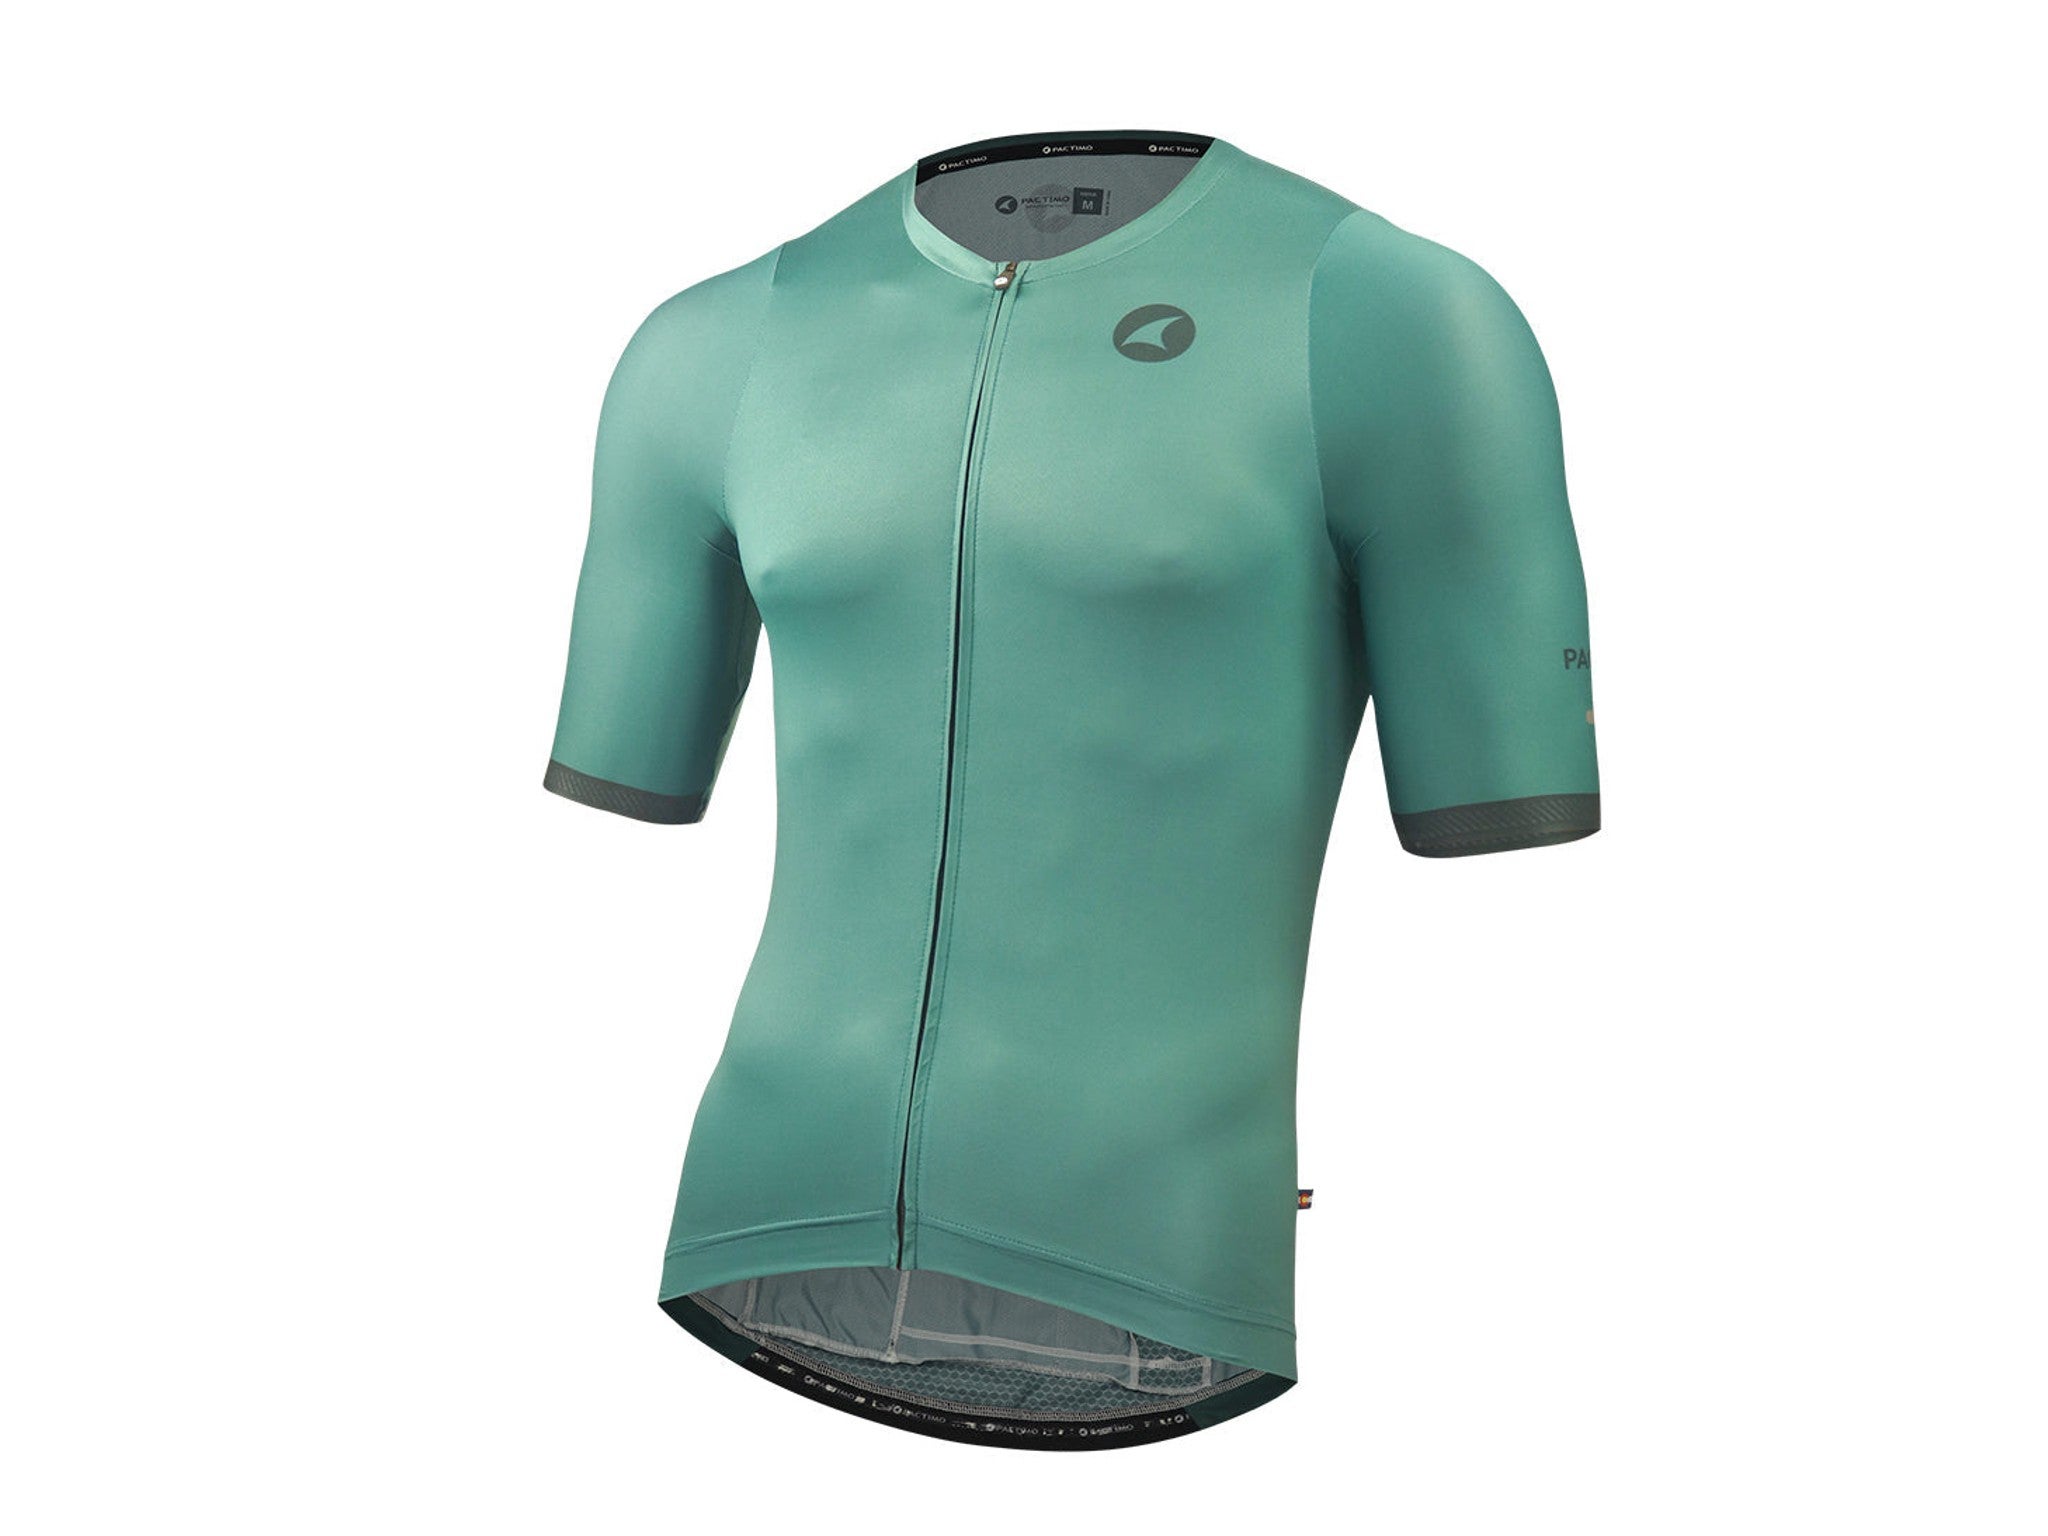 Best cycling jerseys for summer 2022: From UPF sun protection to